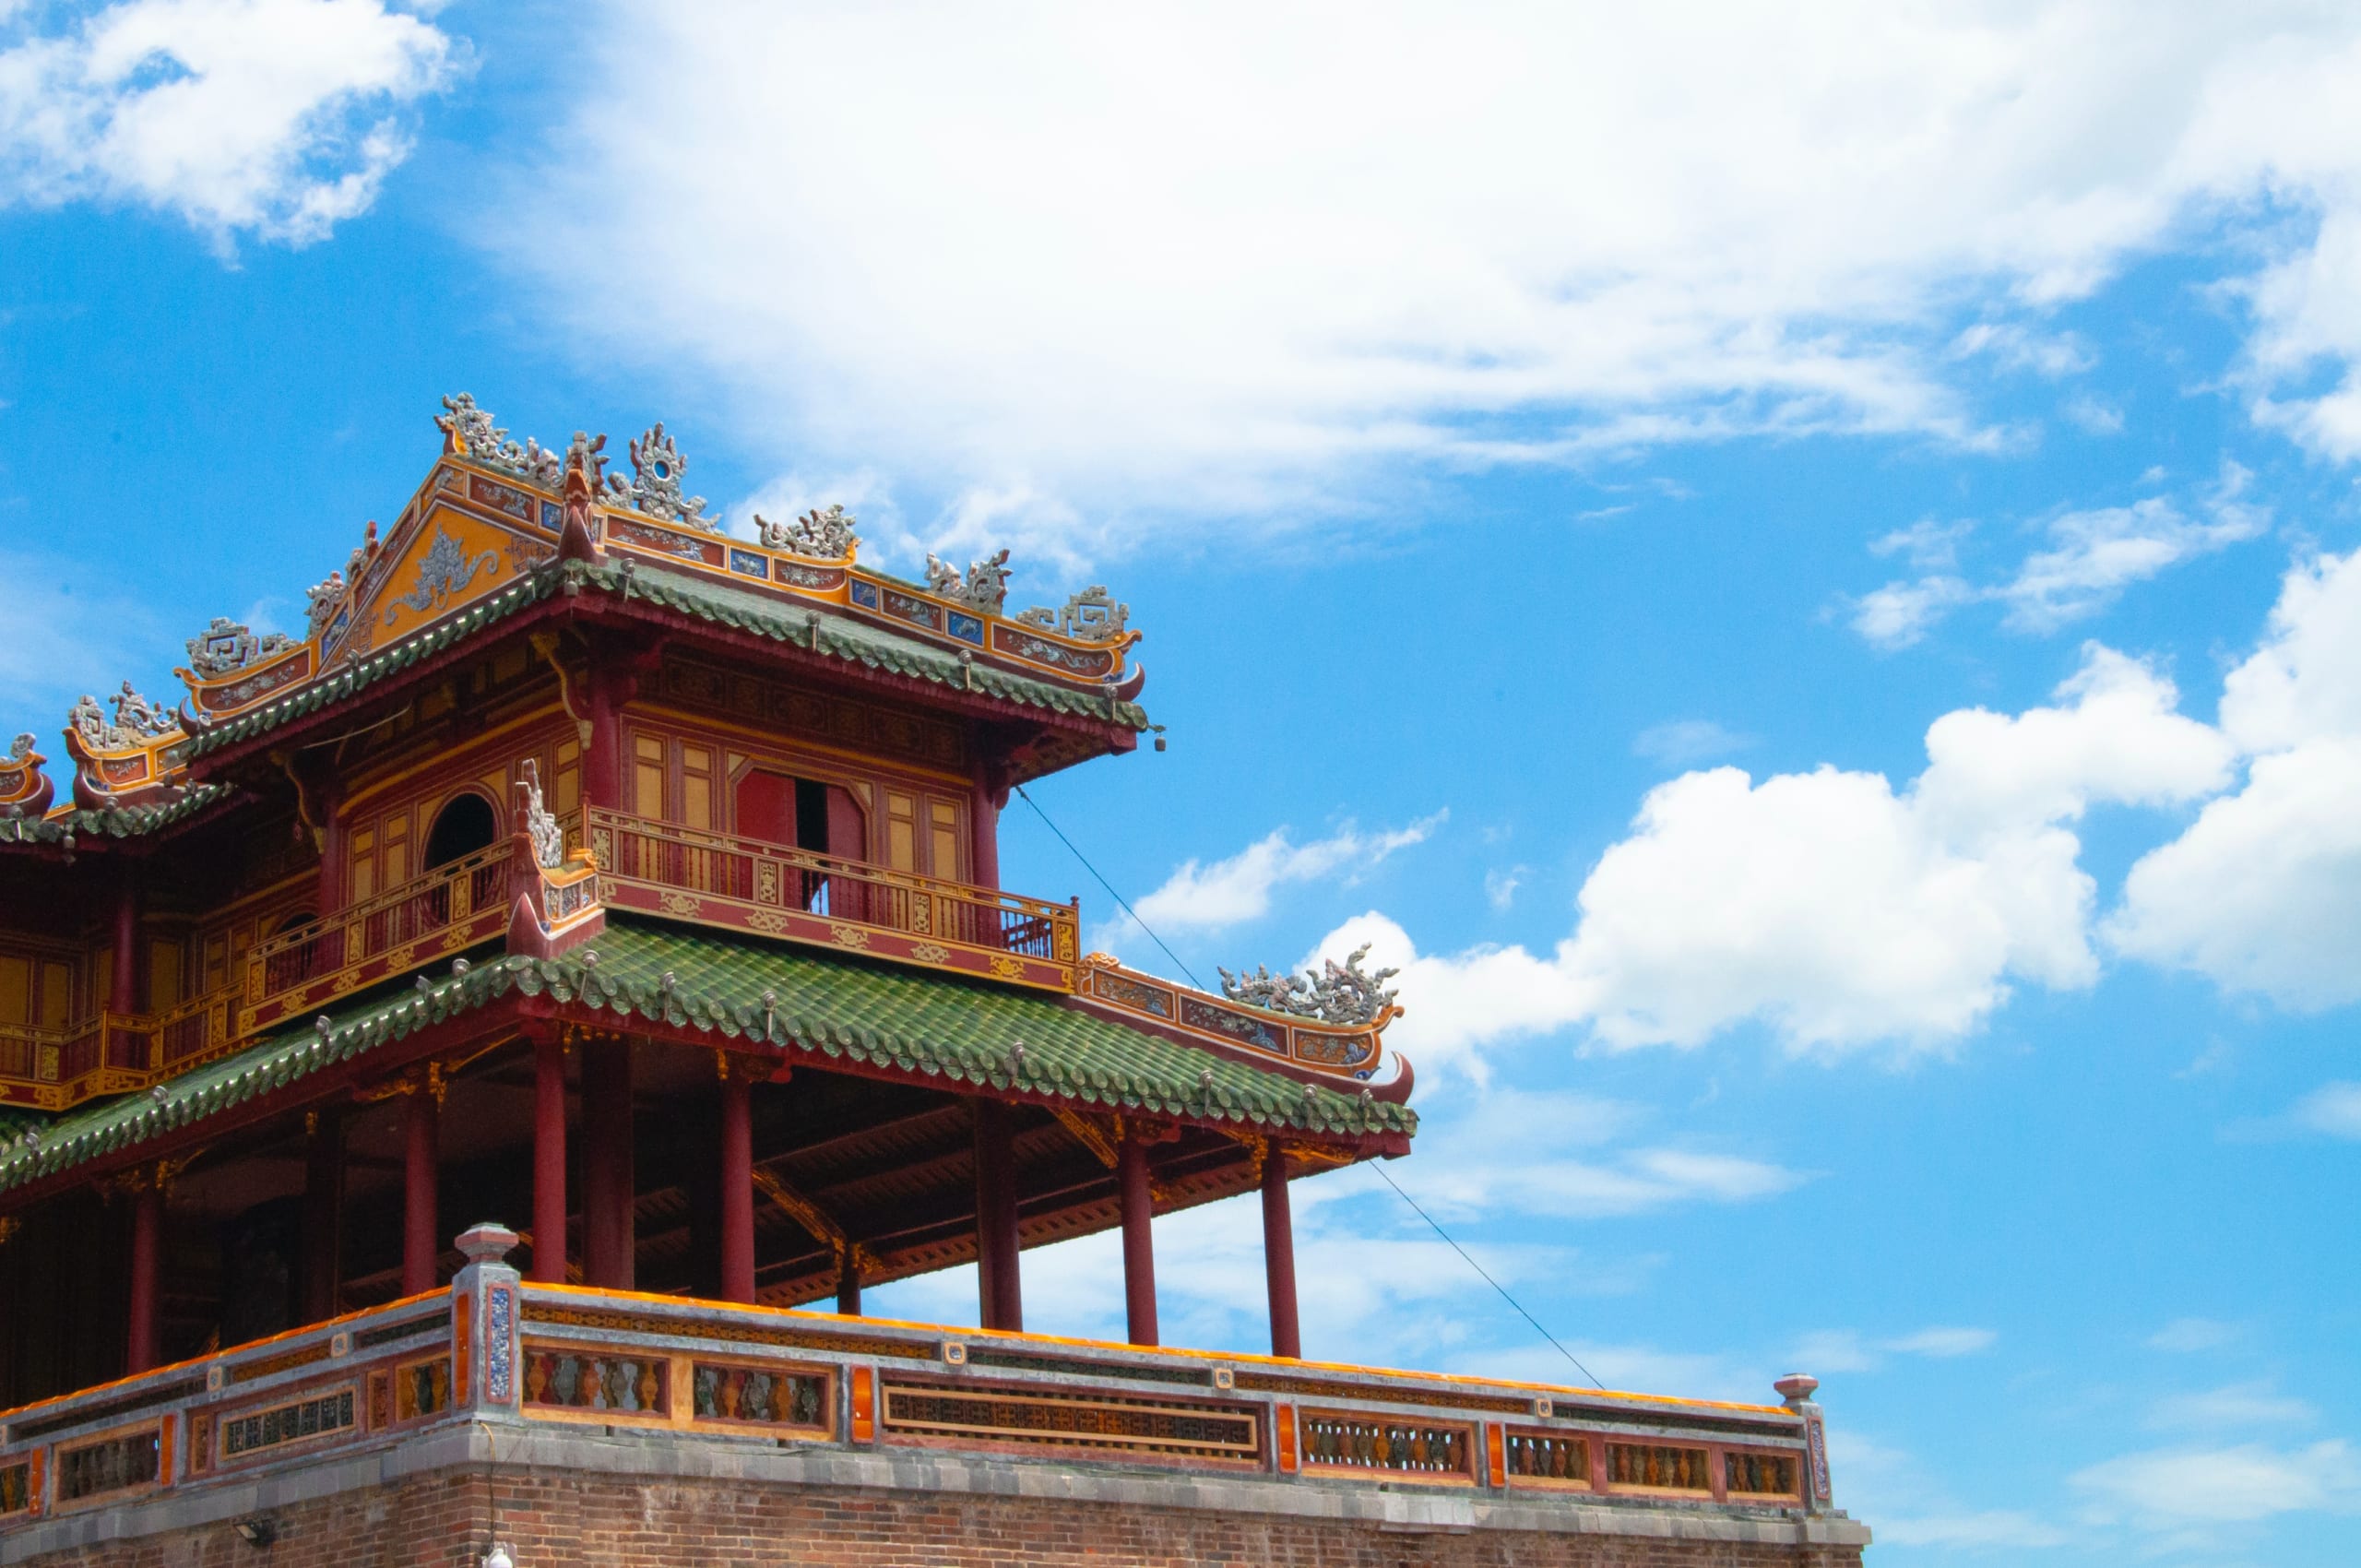 From the iconic Citadel to majestic tombs – HUE